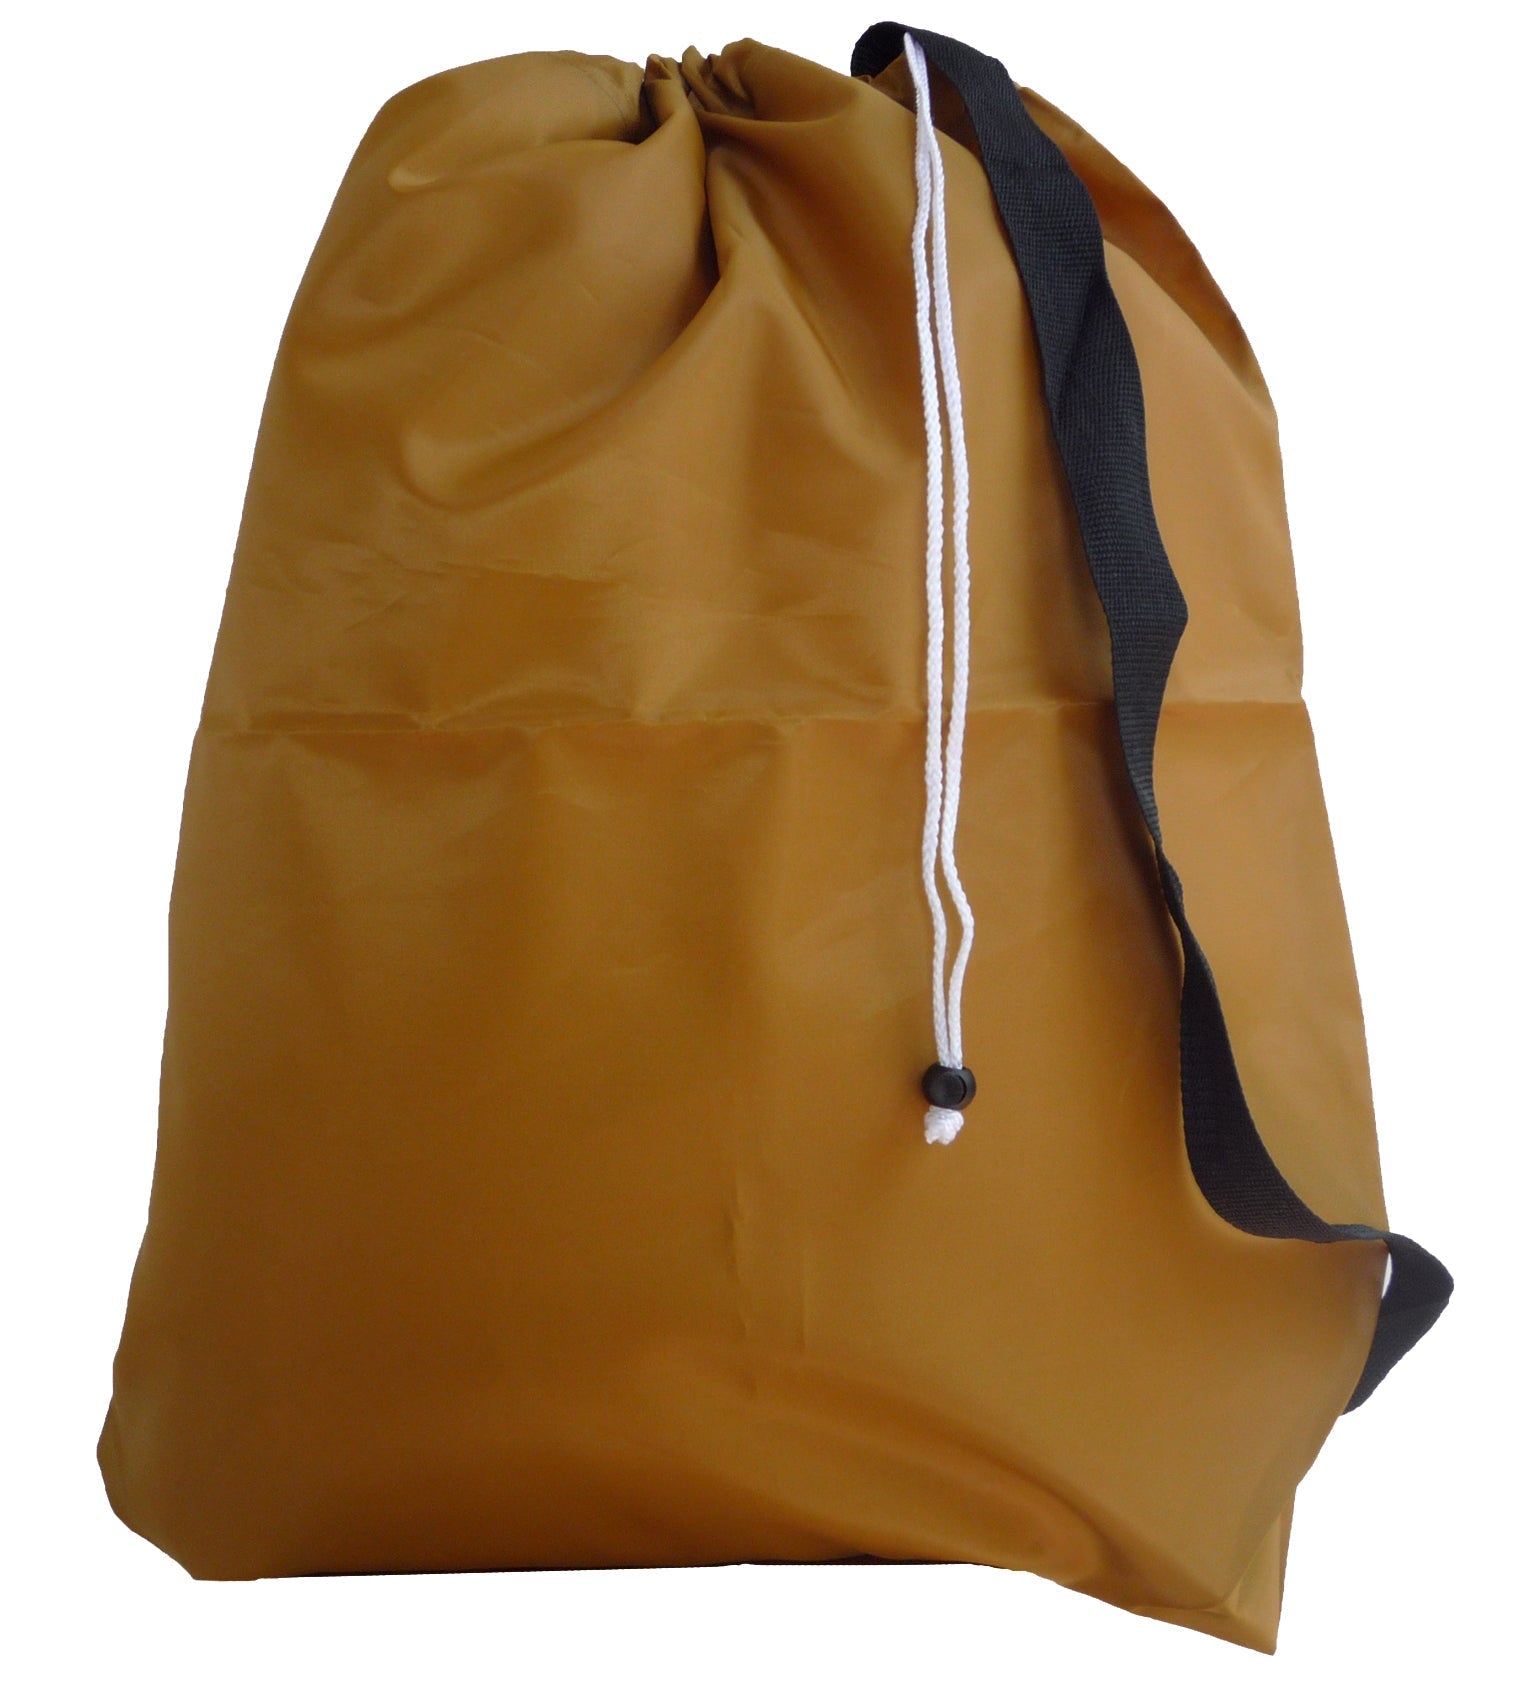 Nylon Laundry Bag - Locking Drawstring Closure and Machine Washable. These  Bags will Fit a Laundry B…See more Nylon Laundry Bag - Locking Drawstring